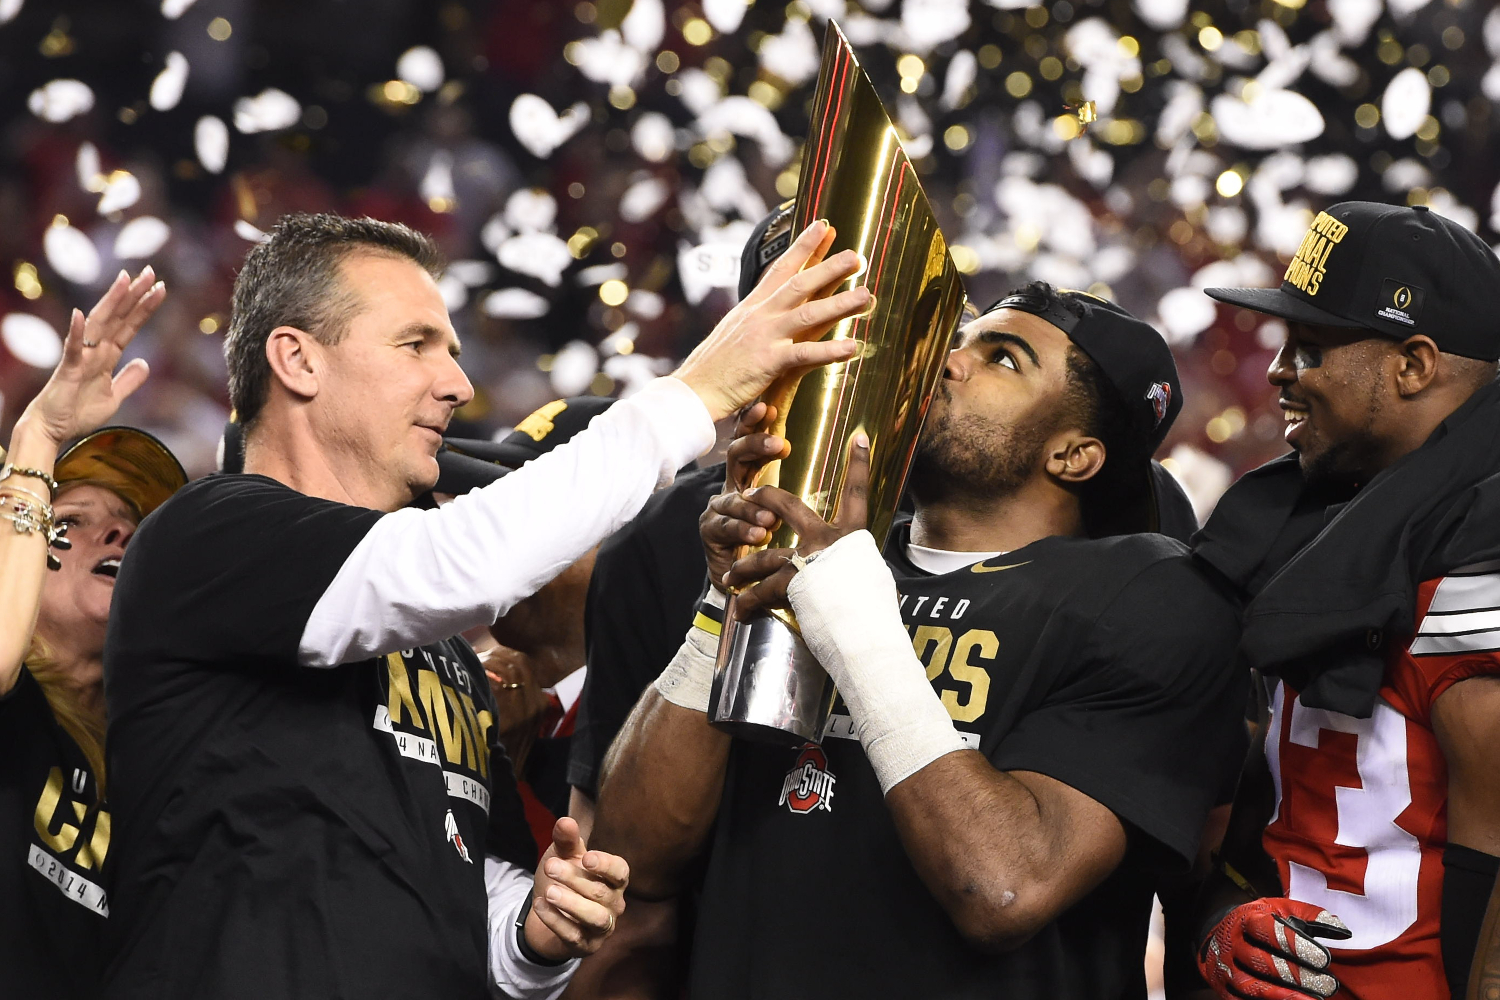 The Ohio State Buckeyes are one of the top college football programs in the country. So, how many national championships have they won?